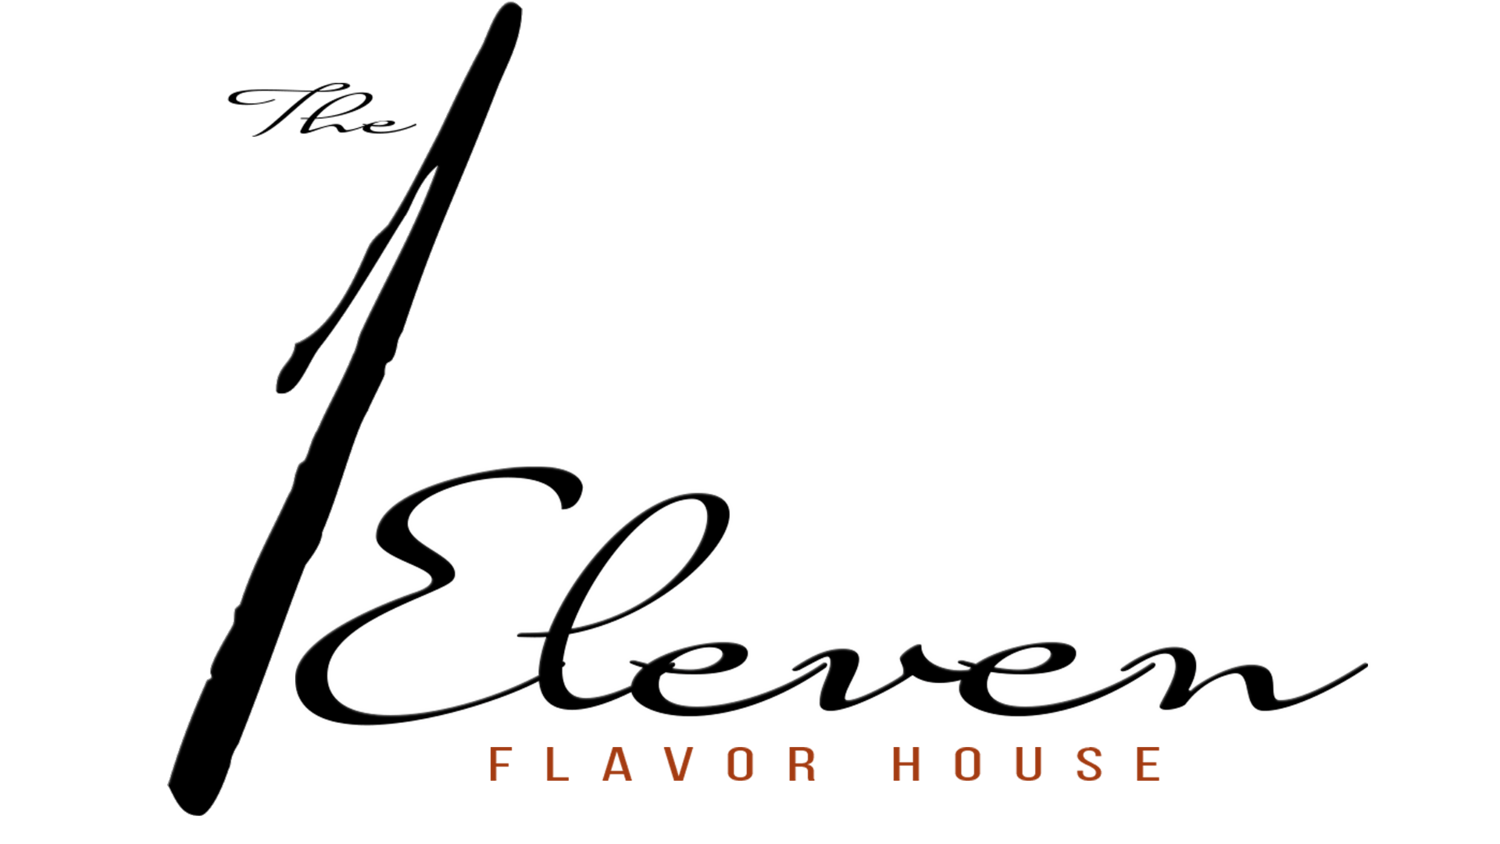 1Eleven Flavor House